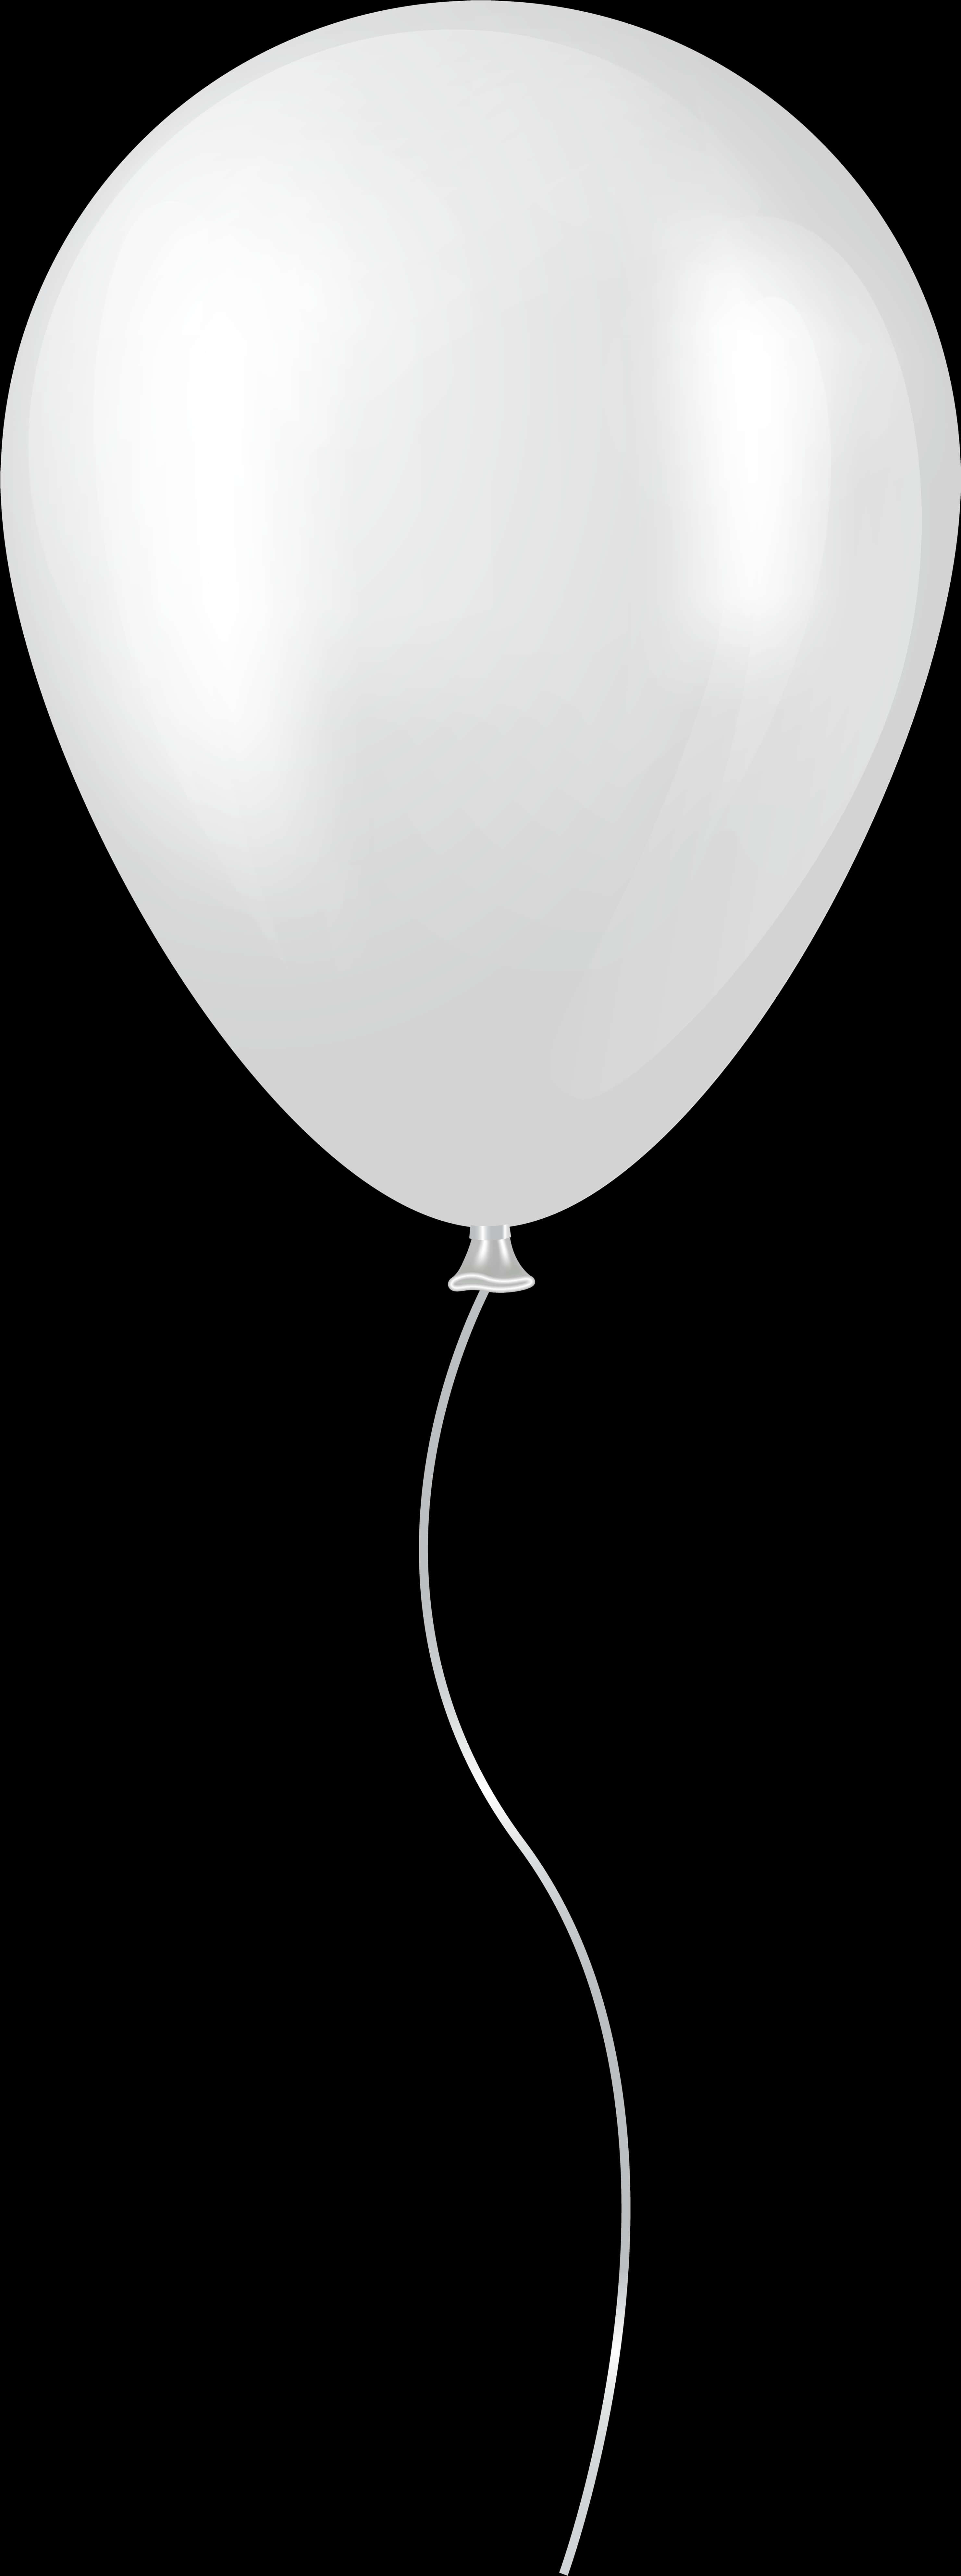 White Balloon Transparent Background.png